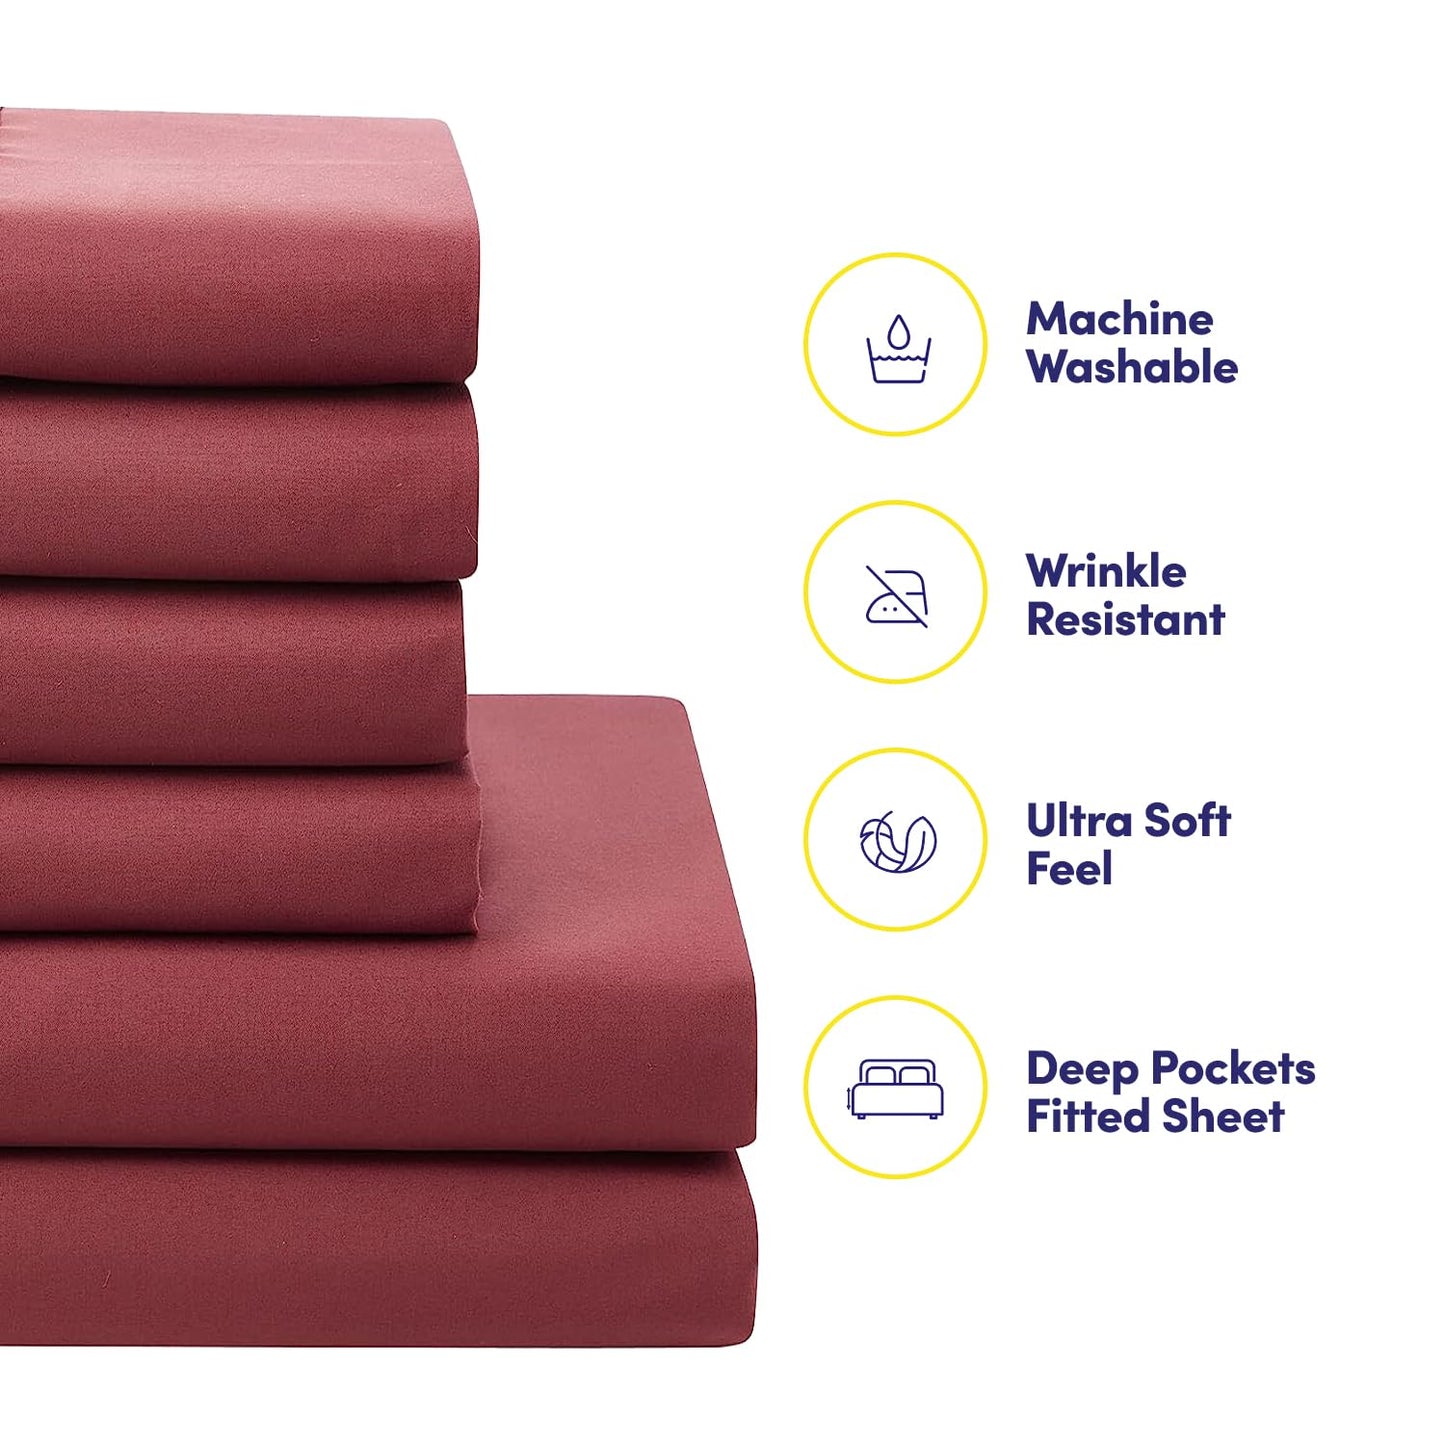 Sweet Home Collection 7 Piece Comforter Set Bag Solid Color All Season Soft Down Alternative Blanket & Luxurious Microfiber Bed Sheets, Burgundy, Twin XL